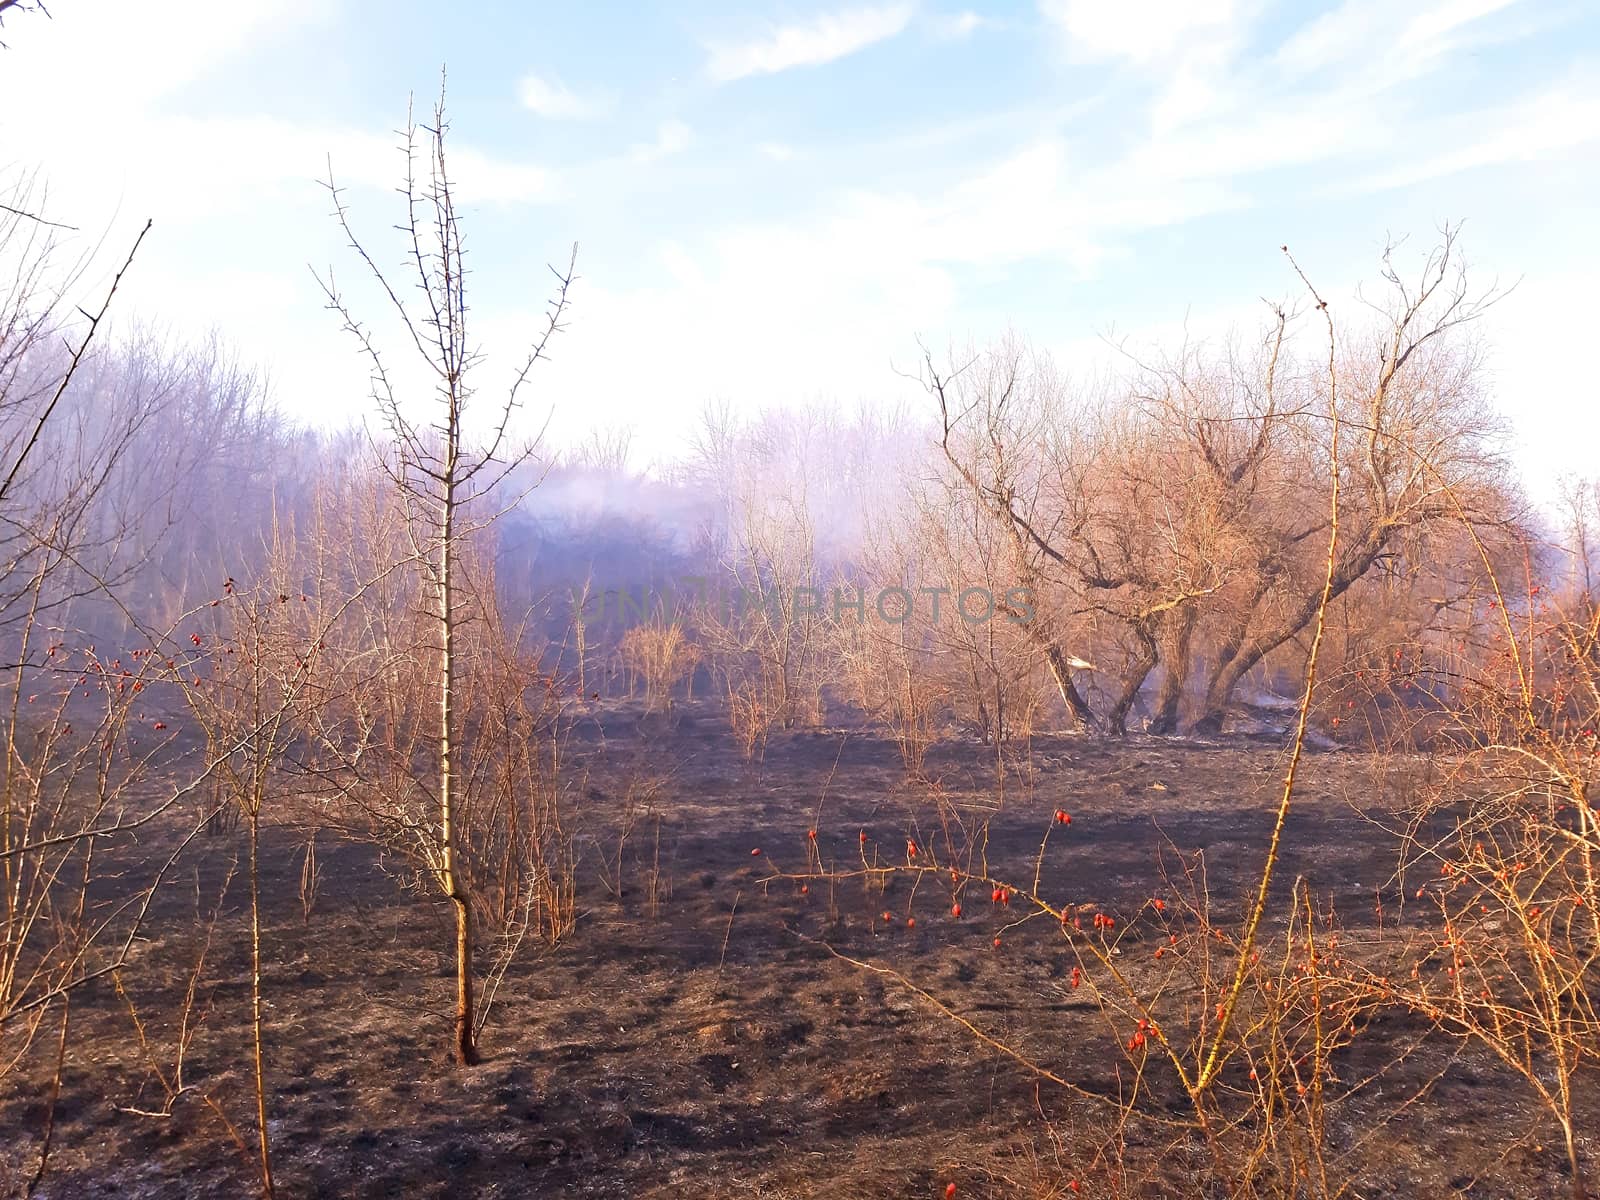 Burning dry grass in the forest, natural disaster.